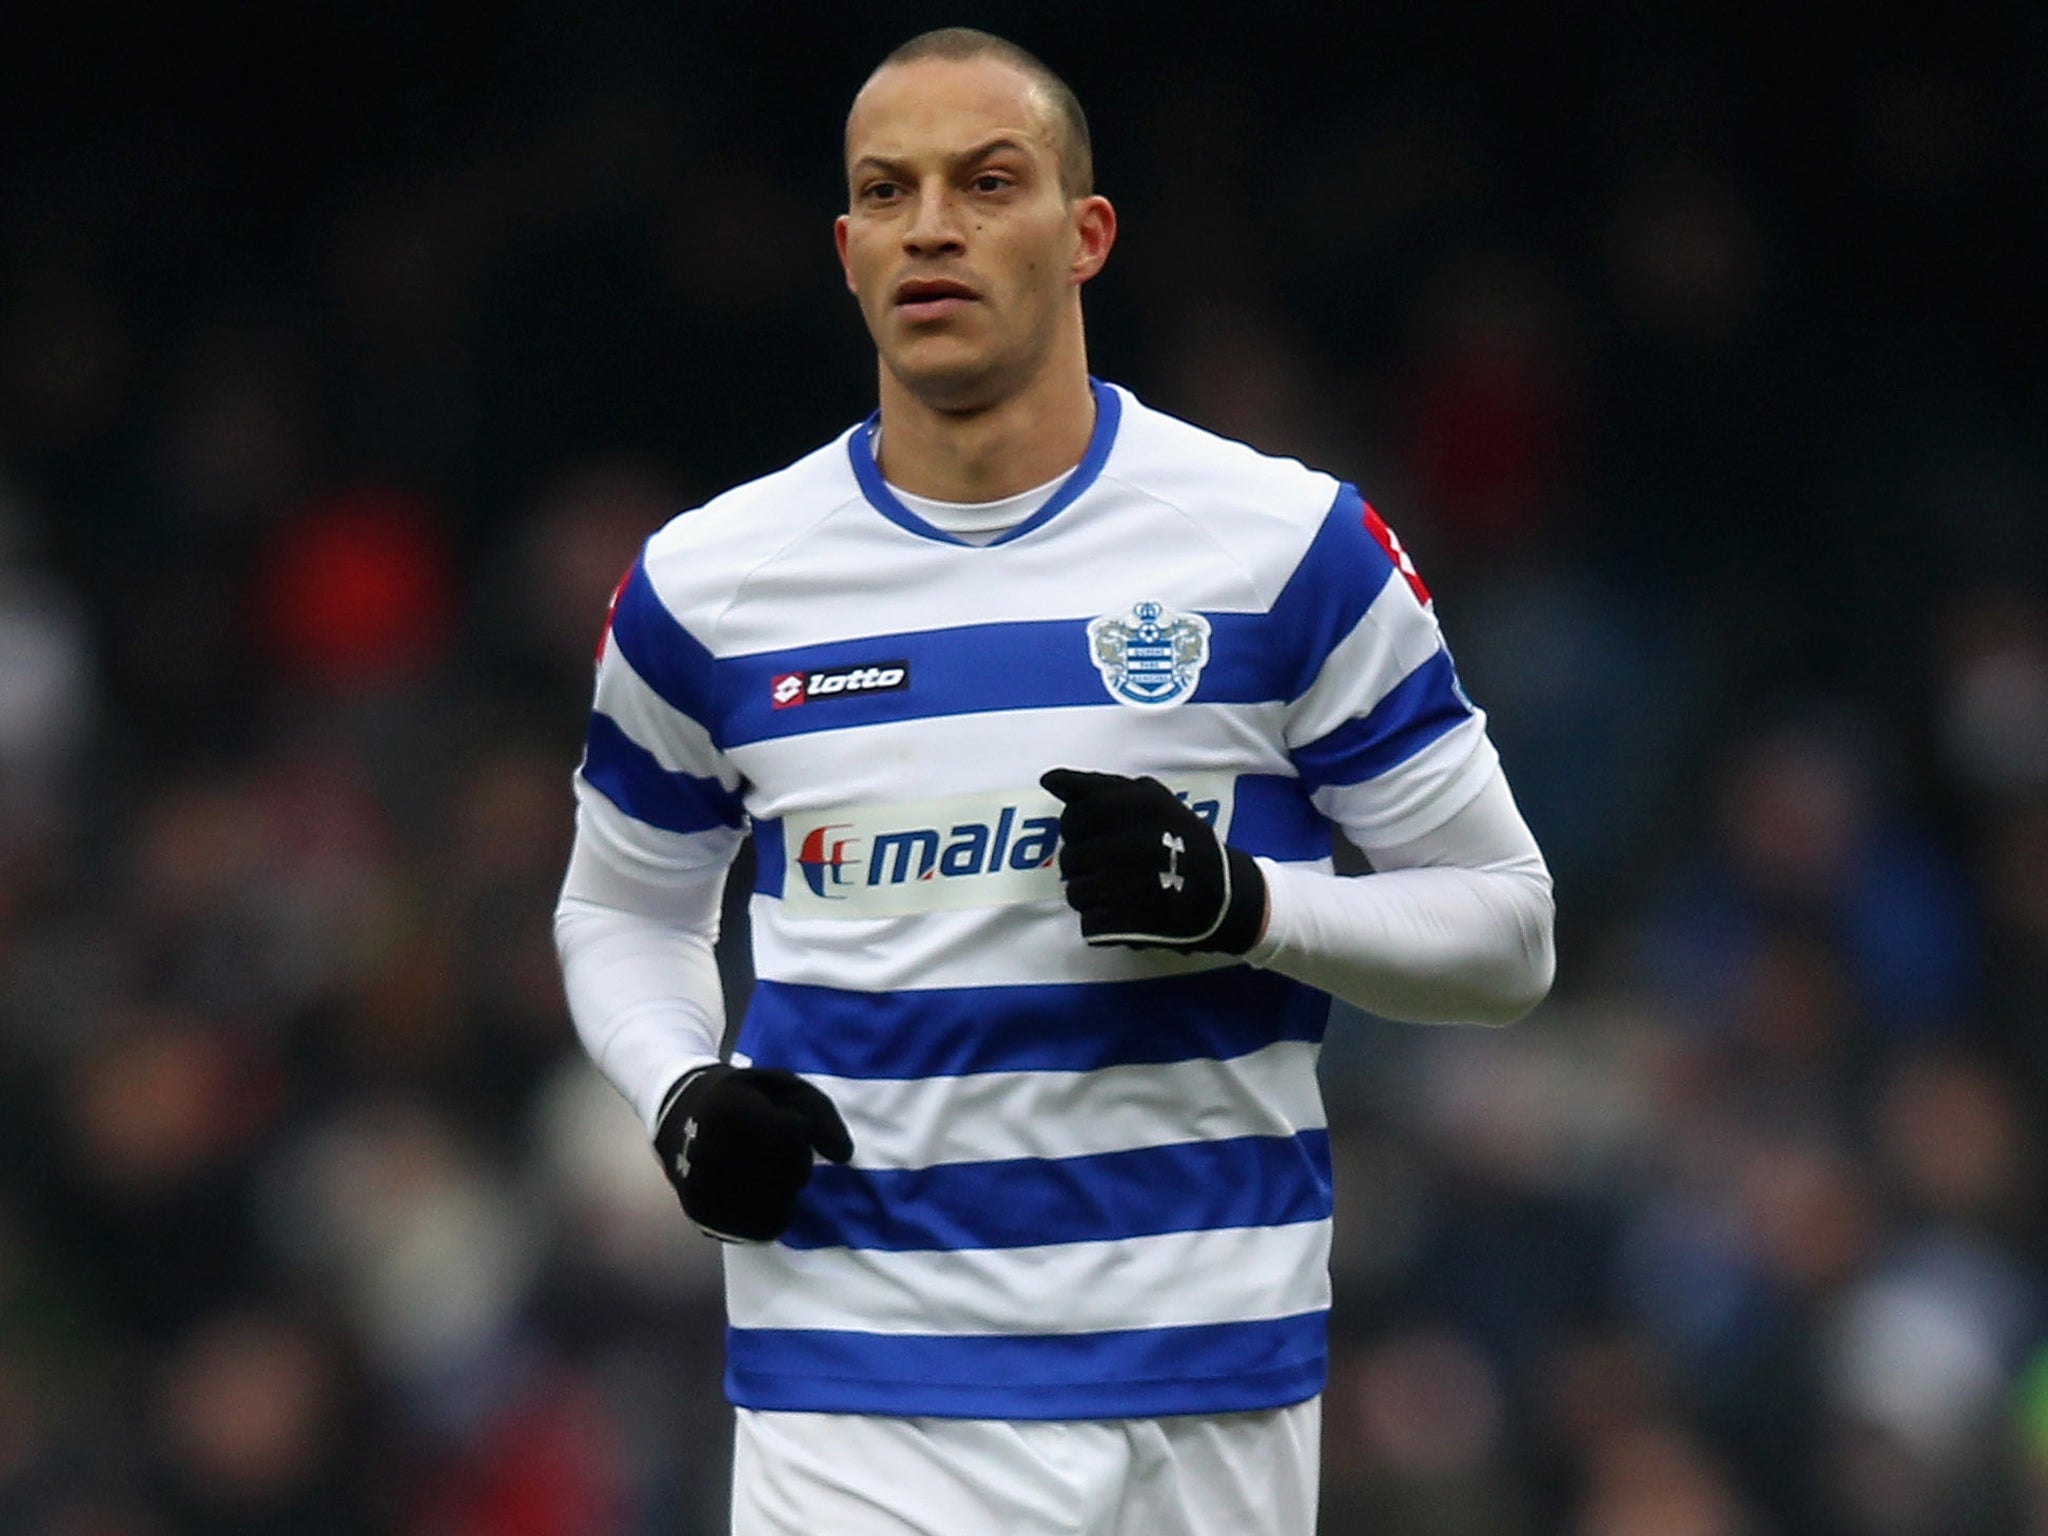 Striker Bobby Zamora returns to his former club this weekend